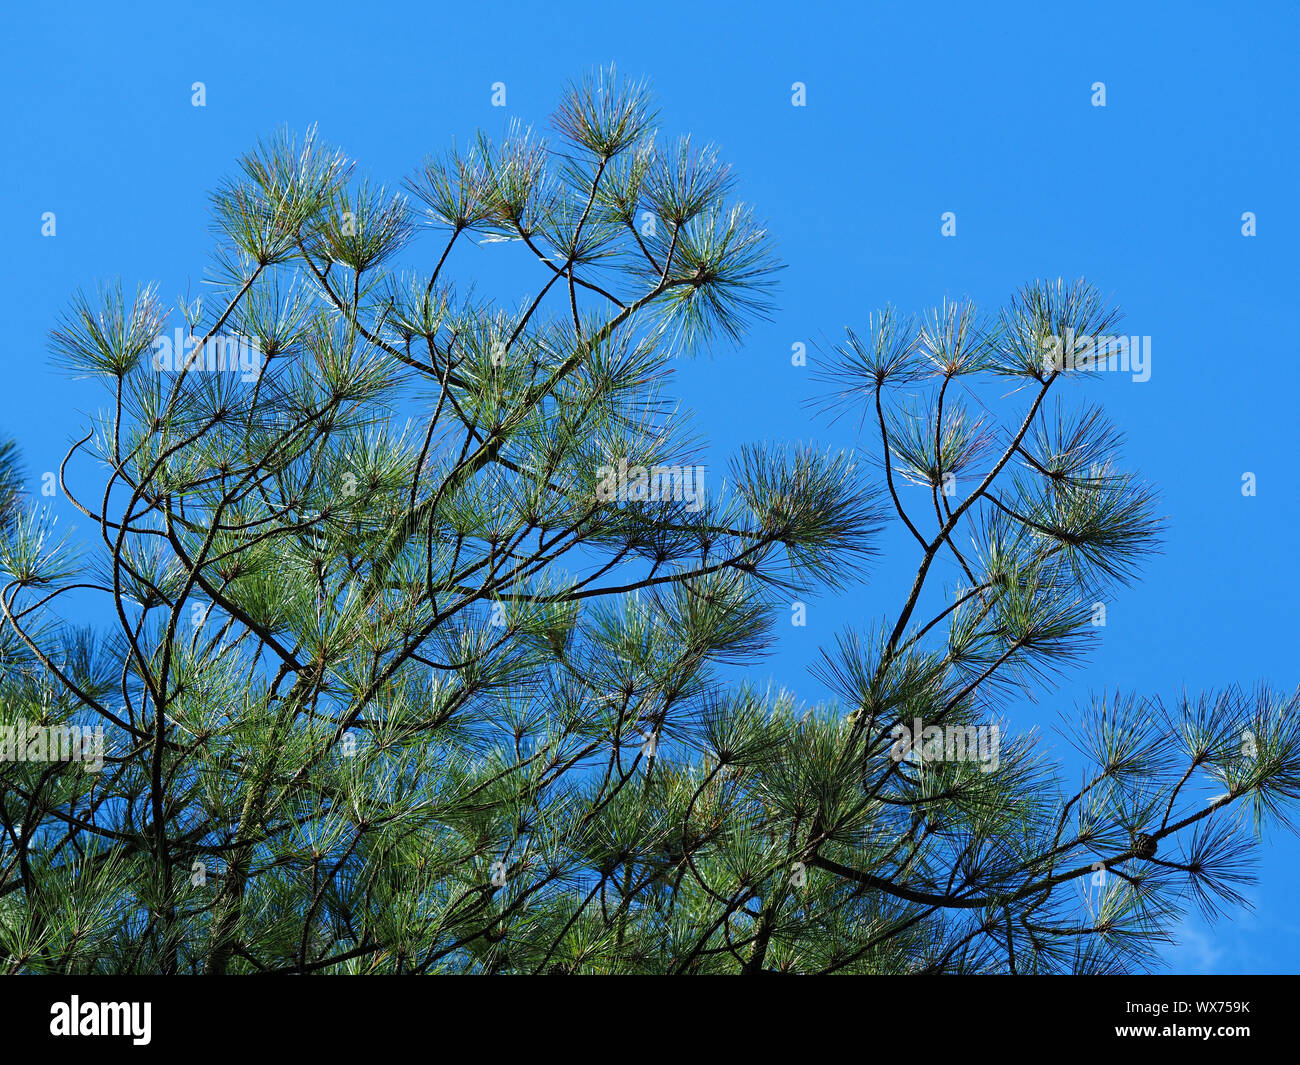 Sunlight catching pine needles on the ends of branches of a young pine tree Stock Photo